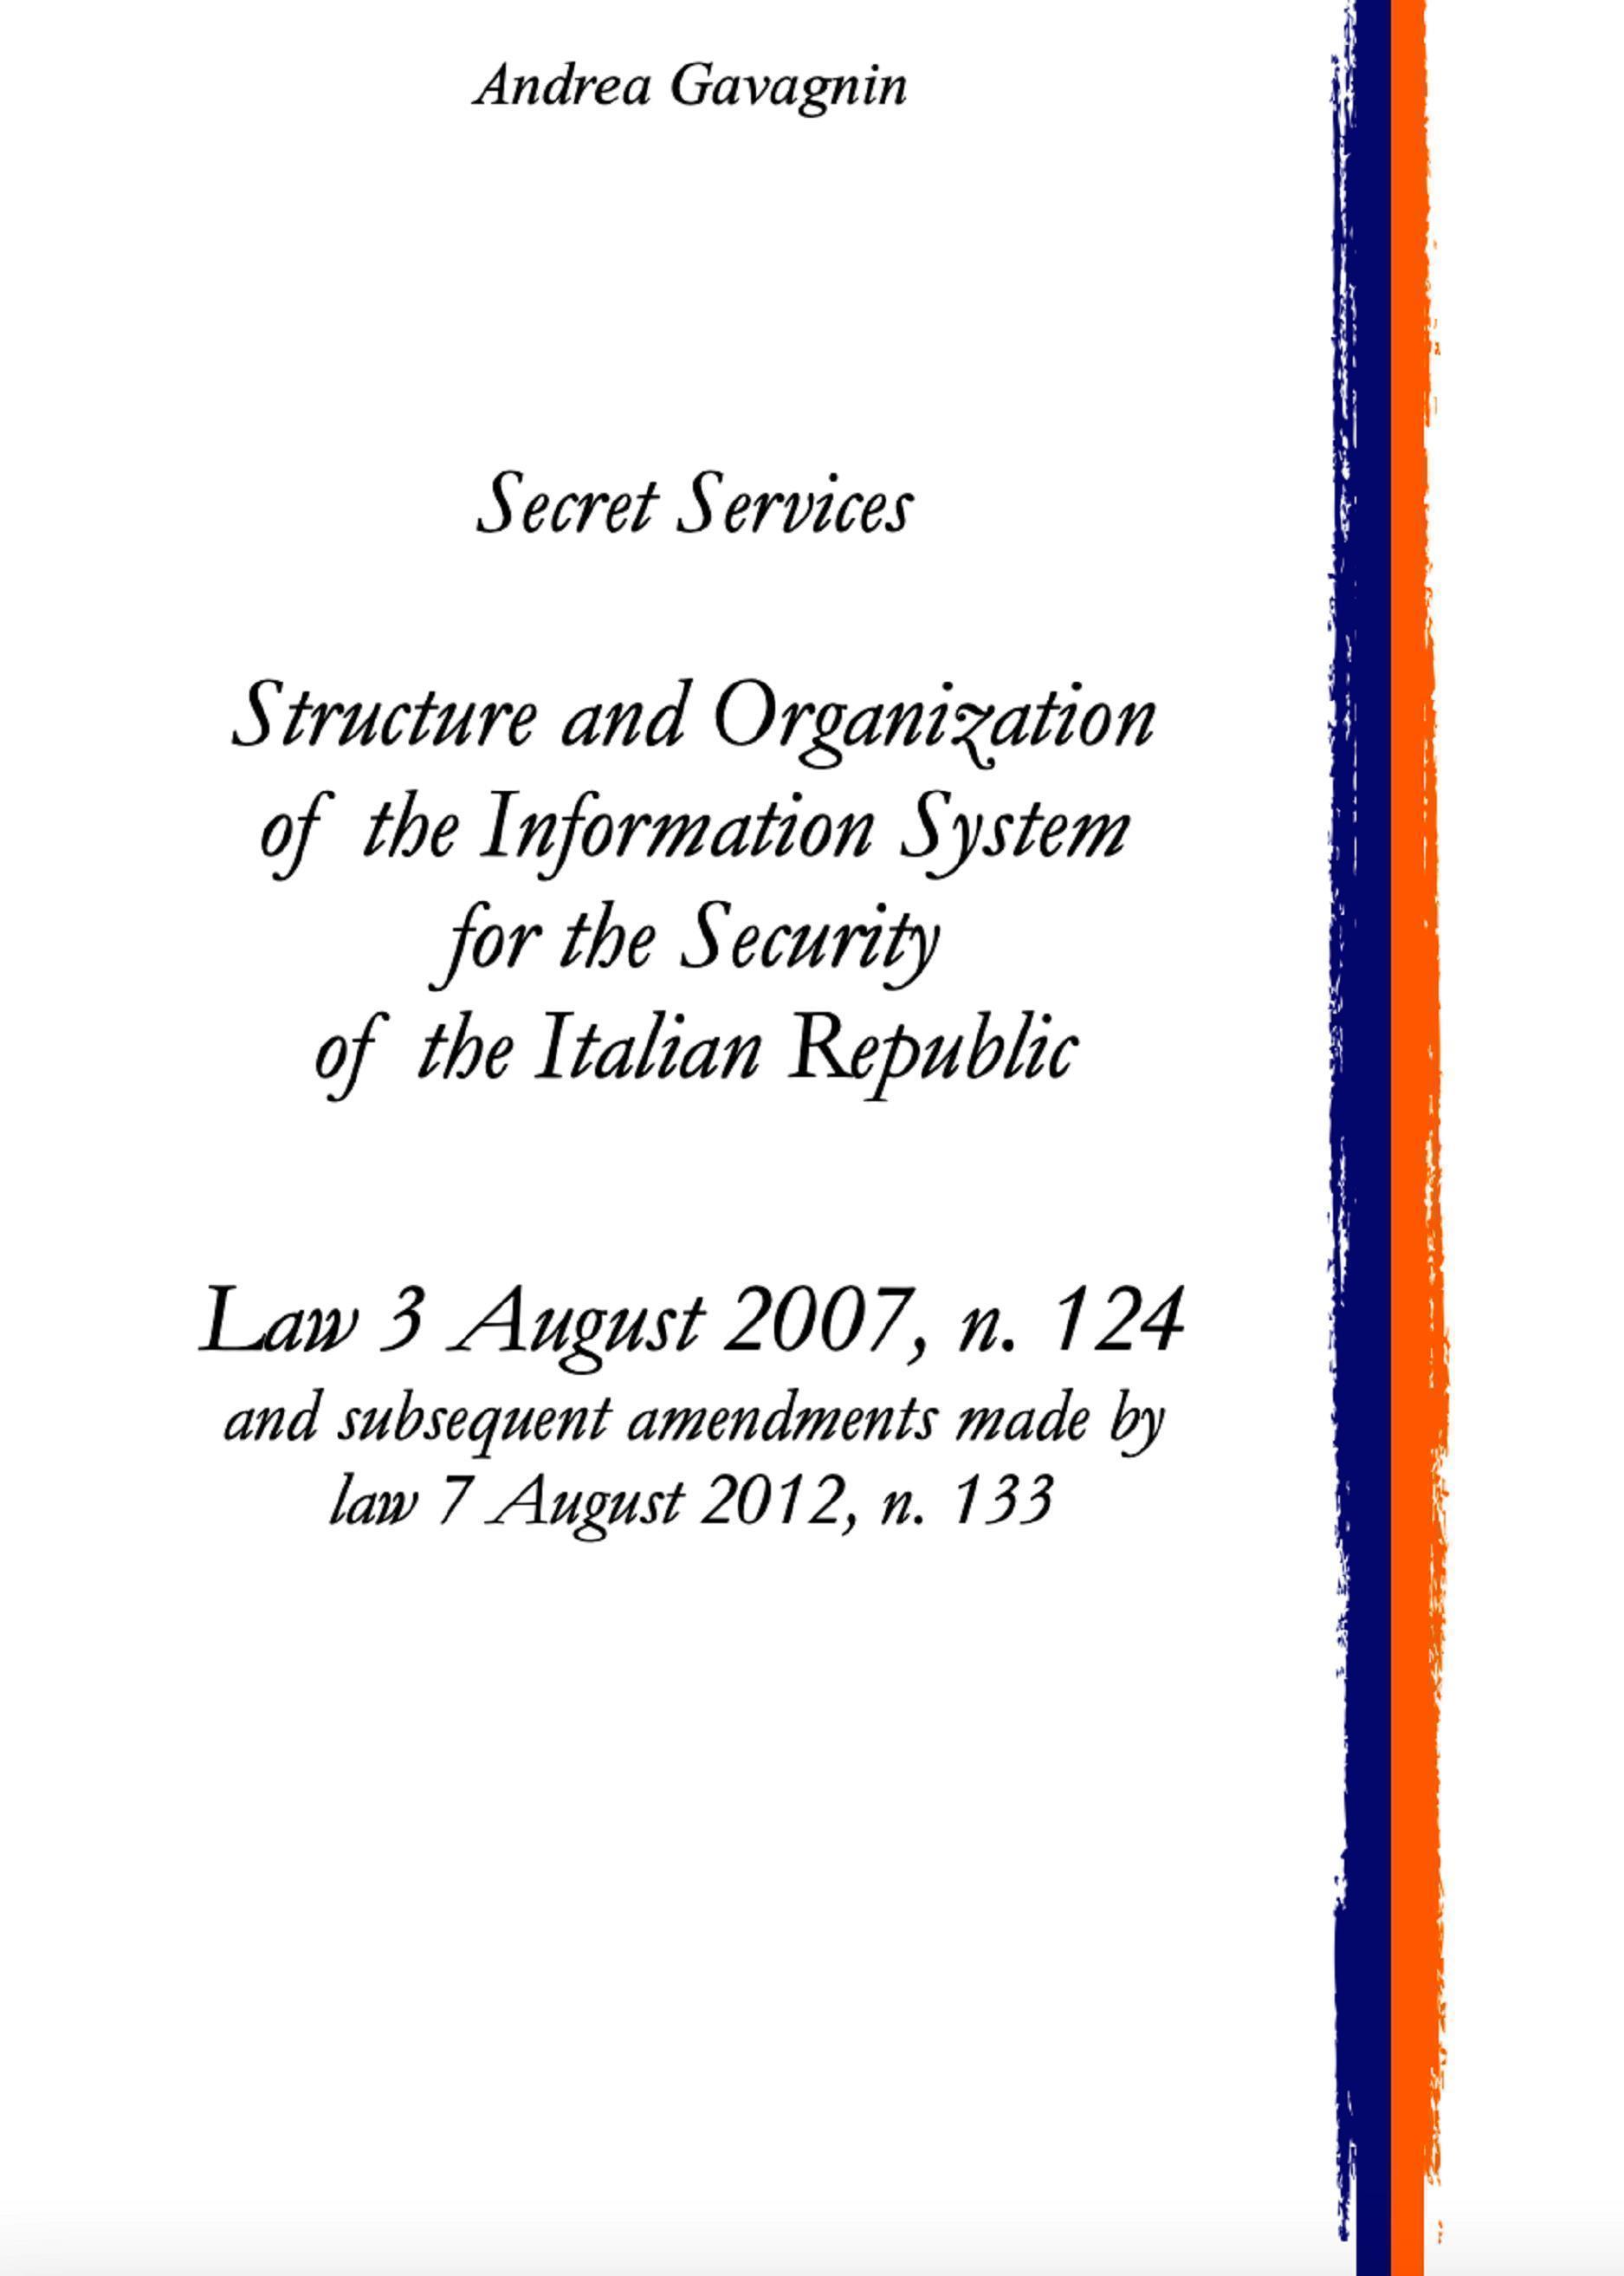 Secret Services: Structure and Organization of the Information System for the Security of the Italian Republic (English version)